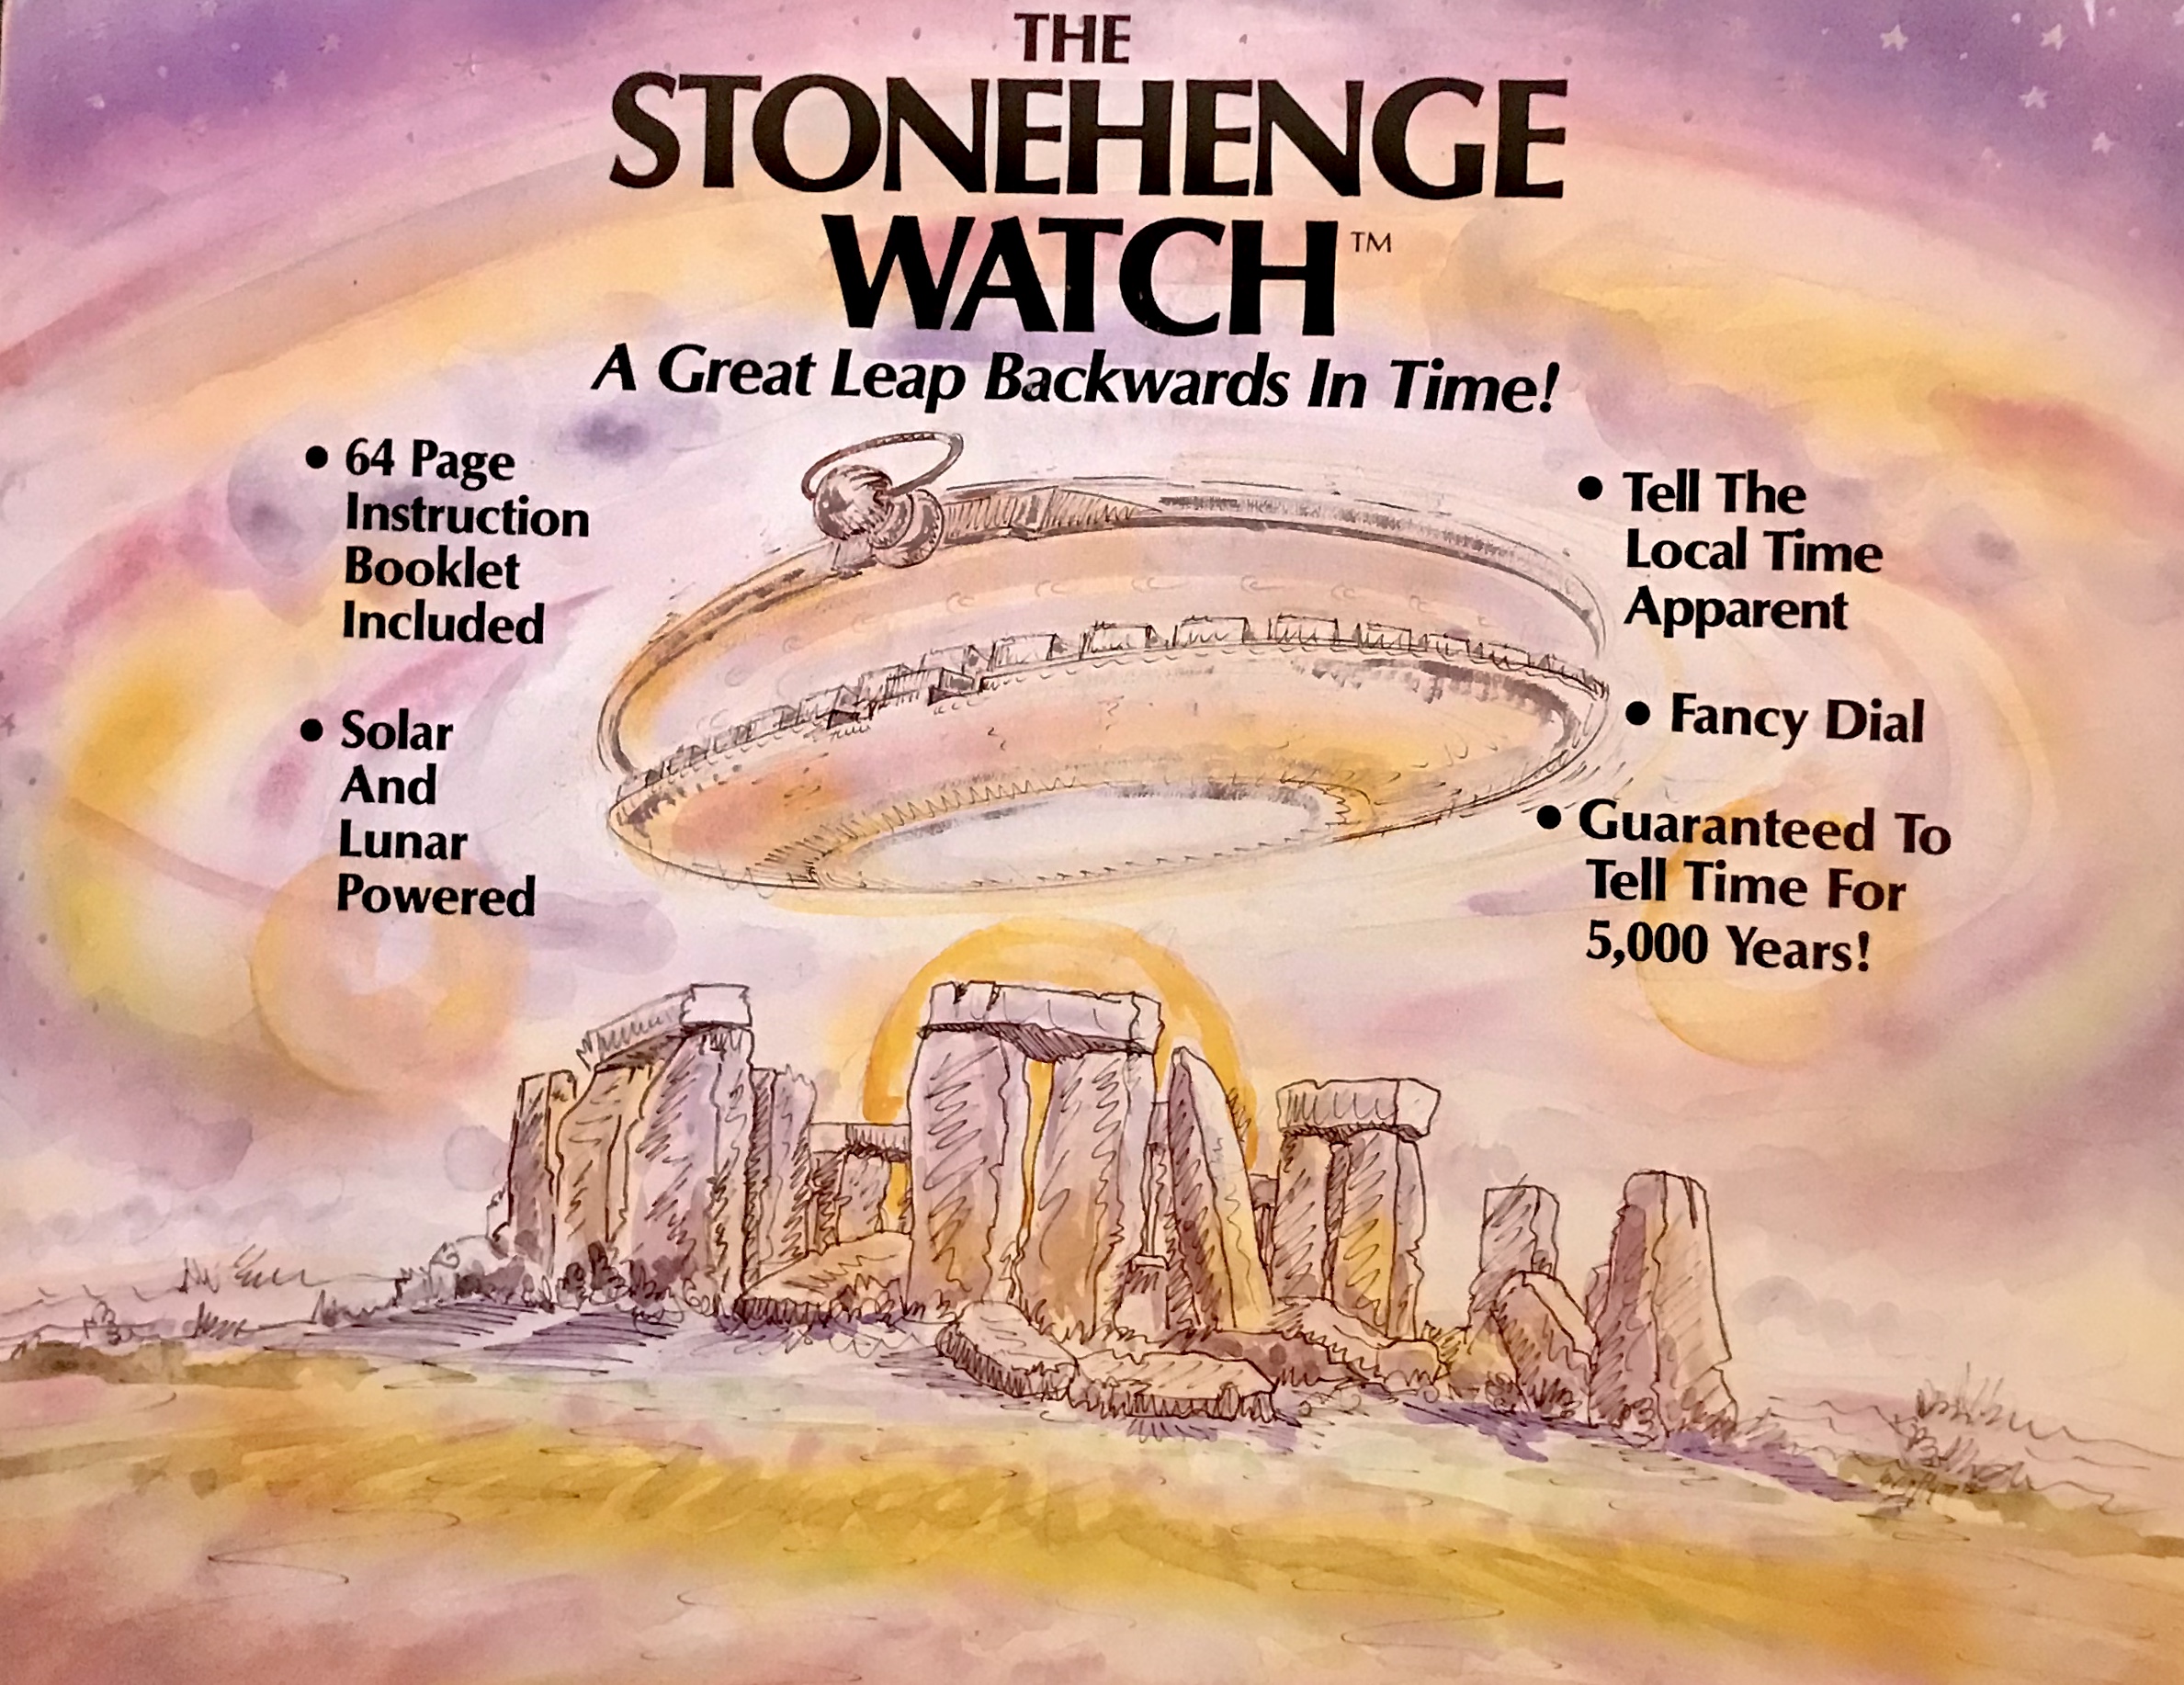 The Stonehenge Watch takes off!